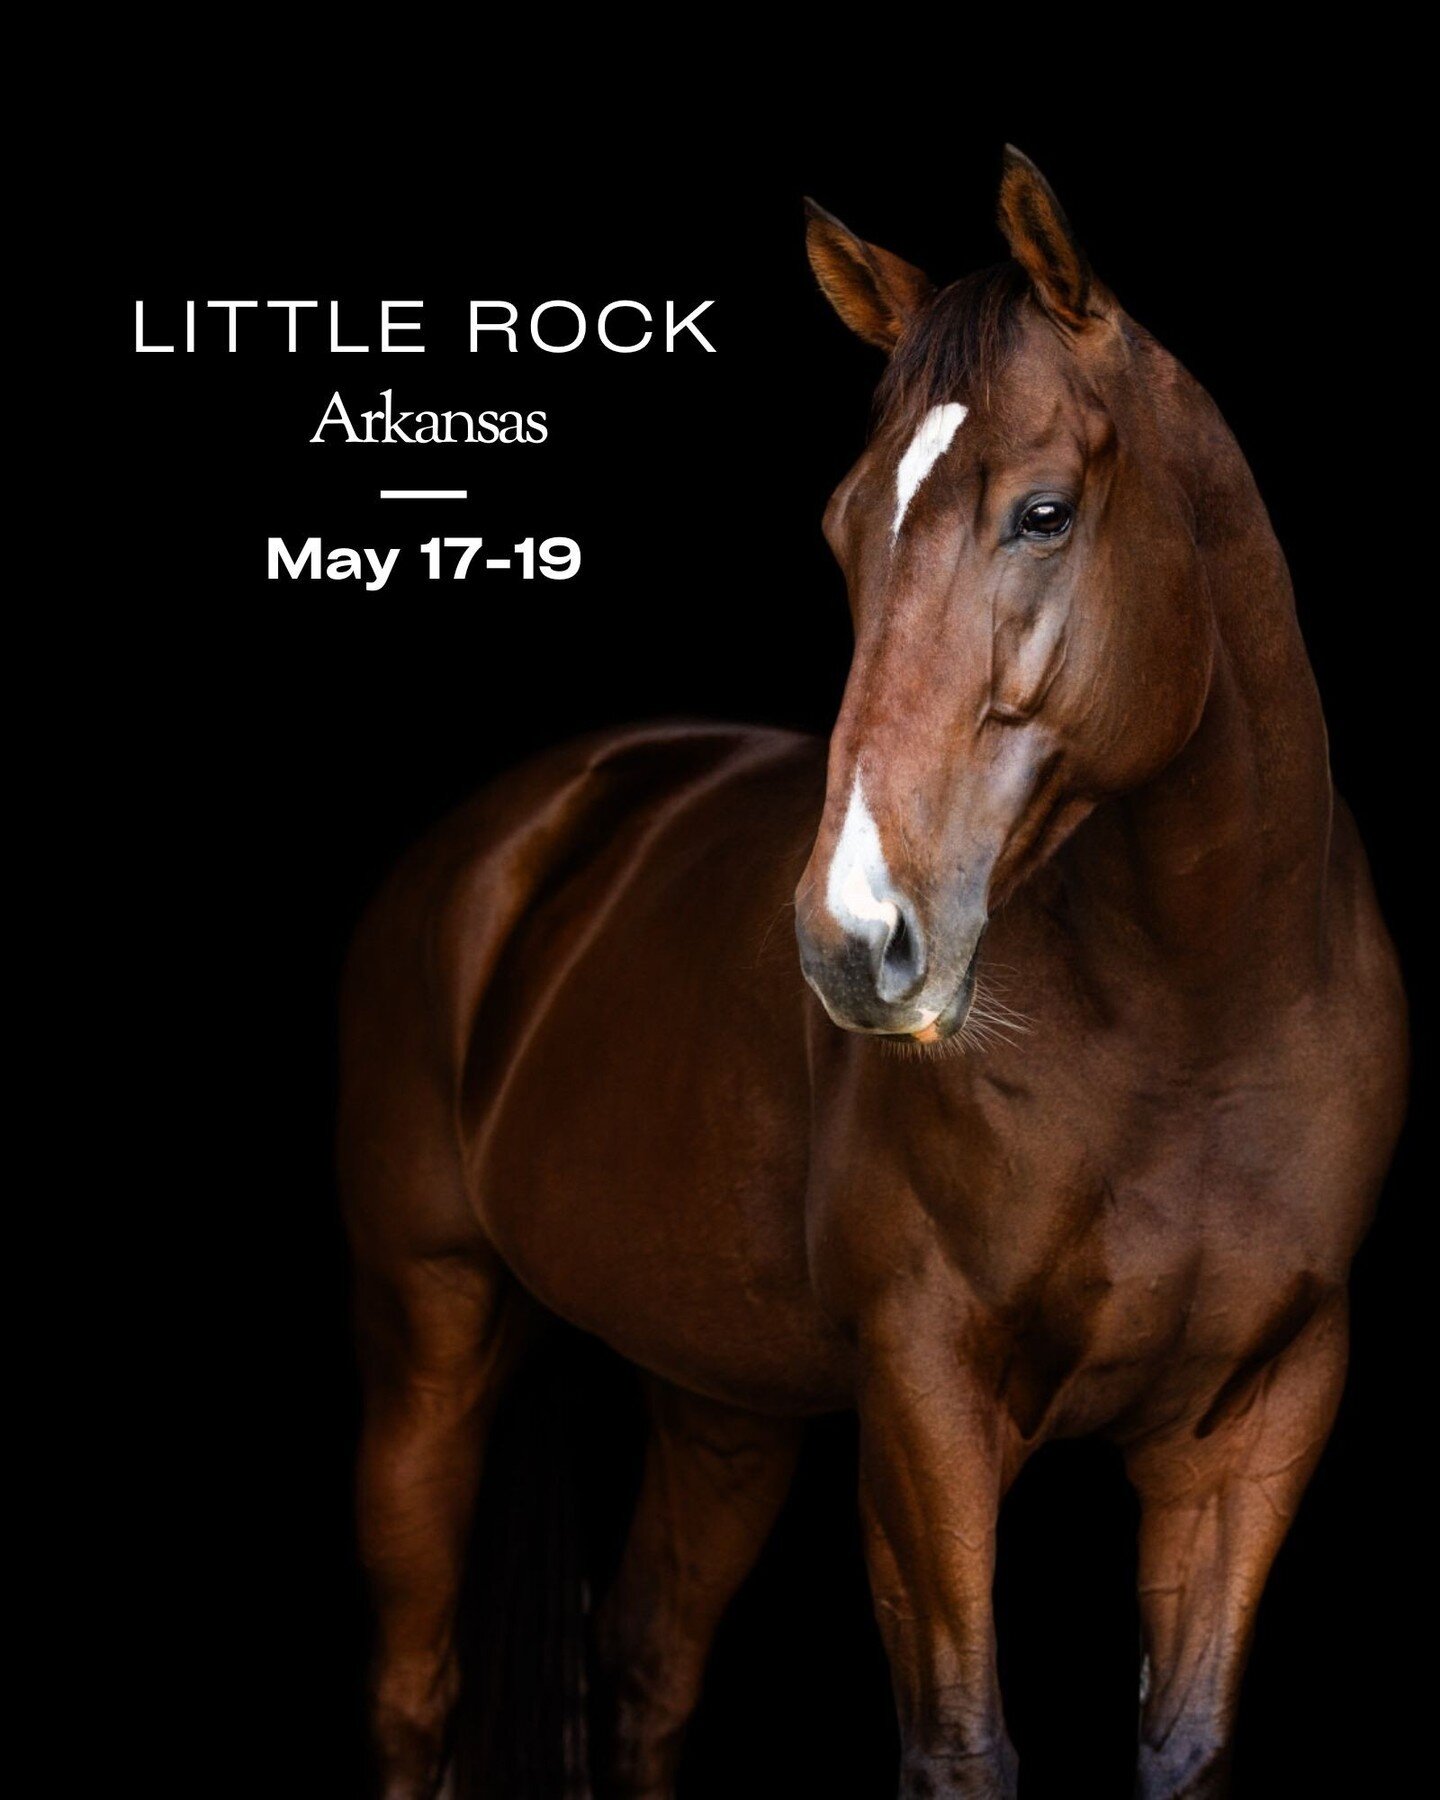 I&rsquo;m headed to Little Rock again and am thrilled to be offering Fine Art Sessions as well as Horse &amp; Rider Session while I&rsquo;m in town. With cooler temps, minimal bugs, and spring greenery, May offers an ideal backdrop for stunning image